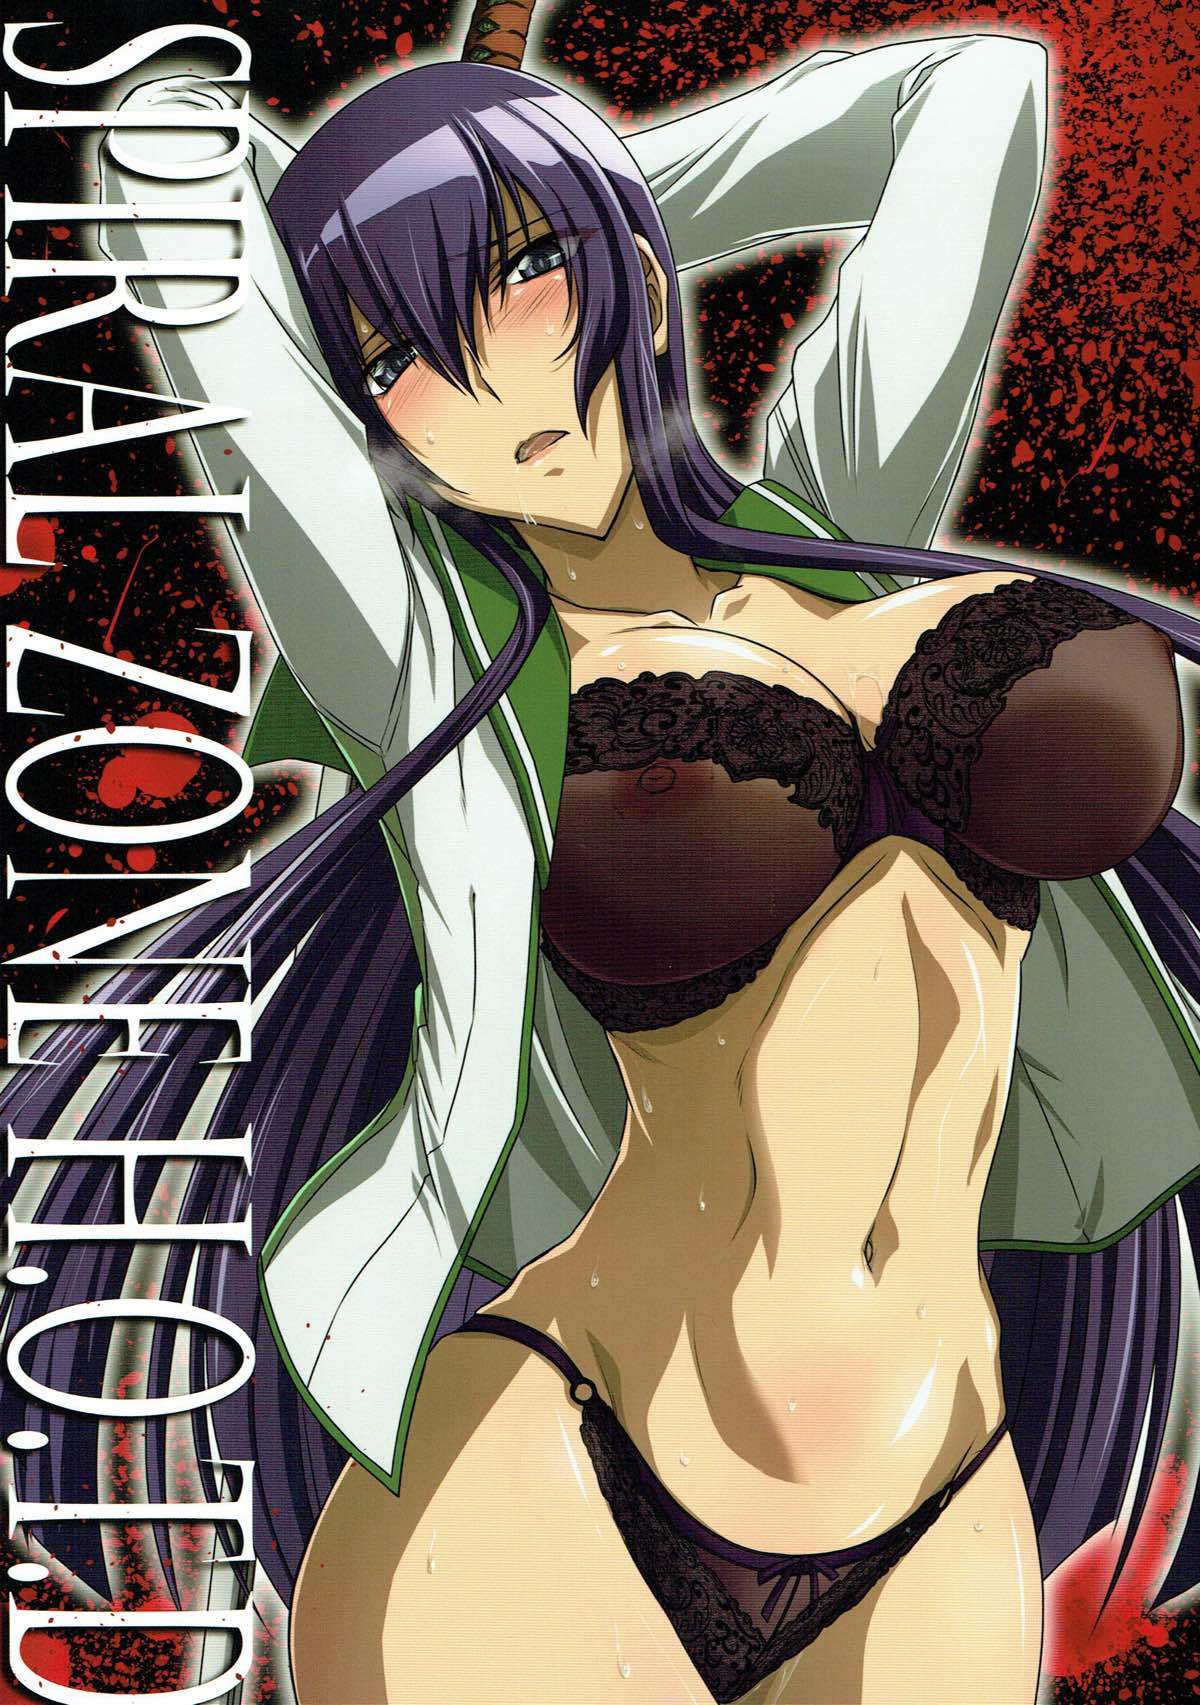 Highschool Of The Dead Porn Game - Highschool of the Dead - Free Hentai Manga, Doujins & XXX